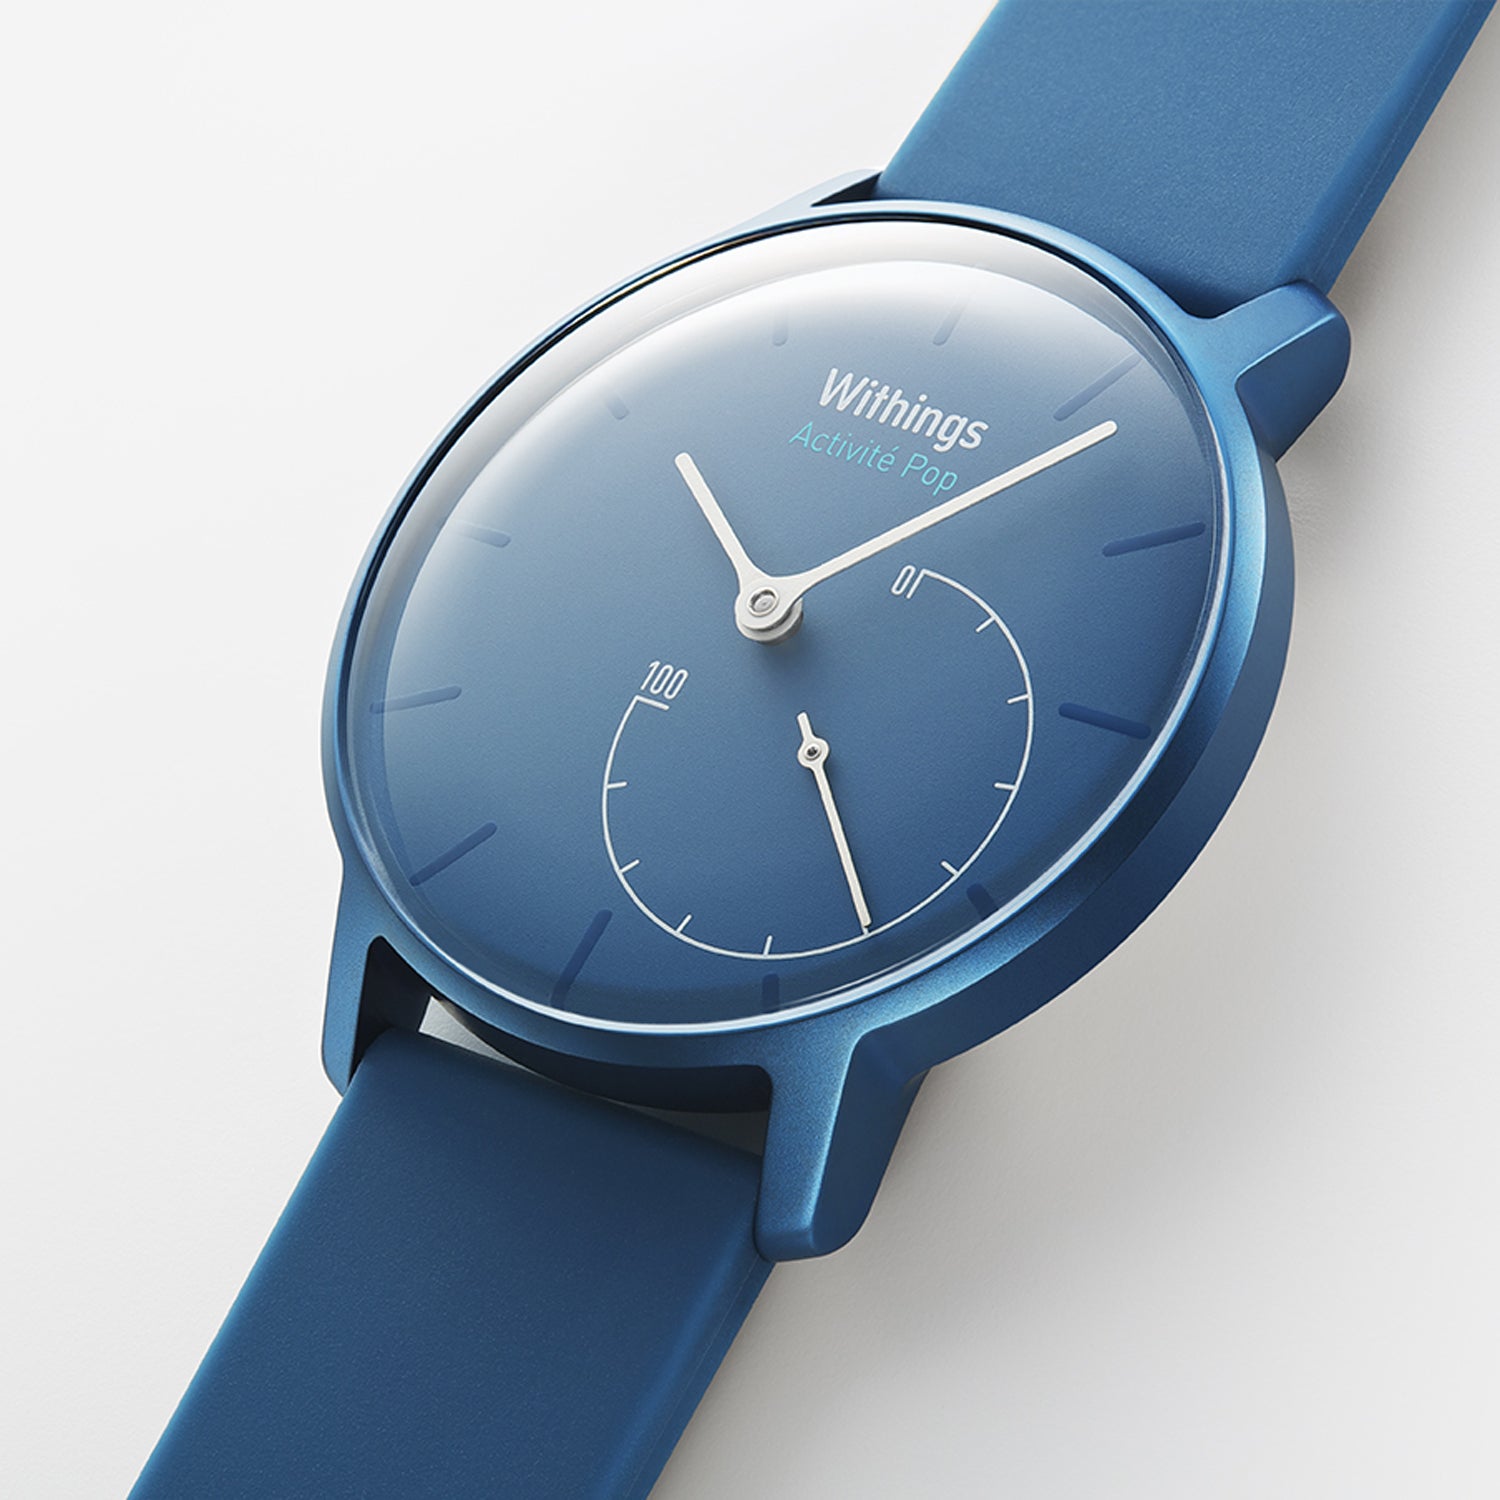 Withings Scanwatch Has Some Of The Best Battery Life In The Smartwatch Game